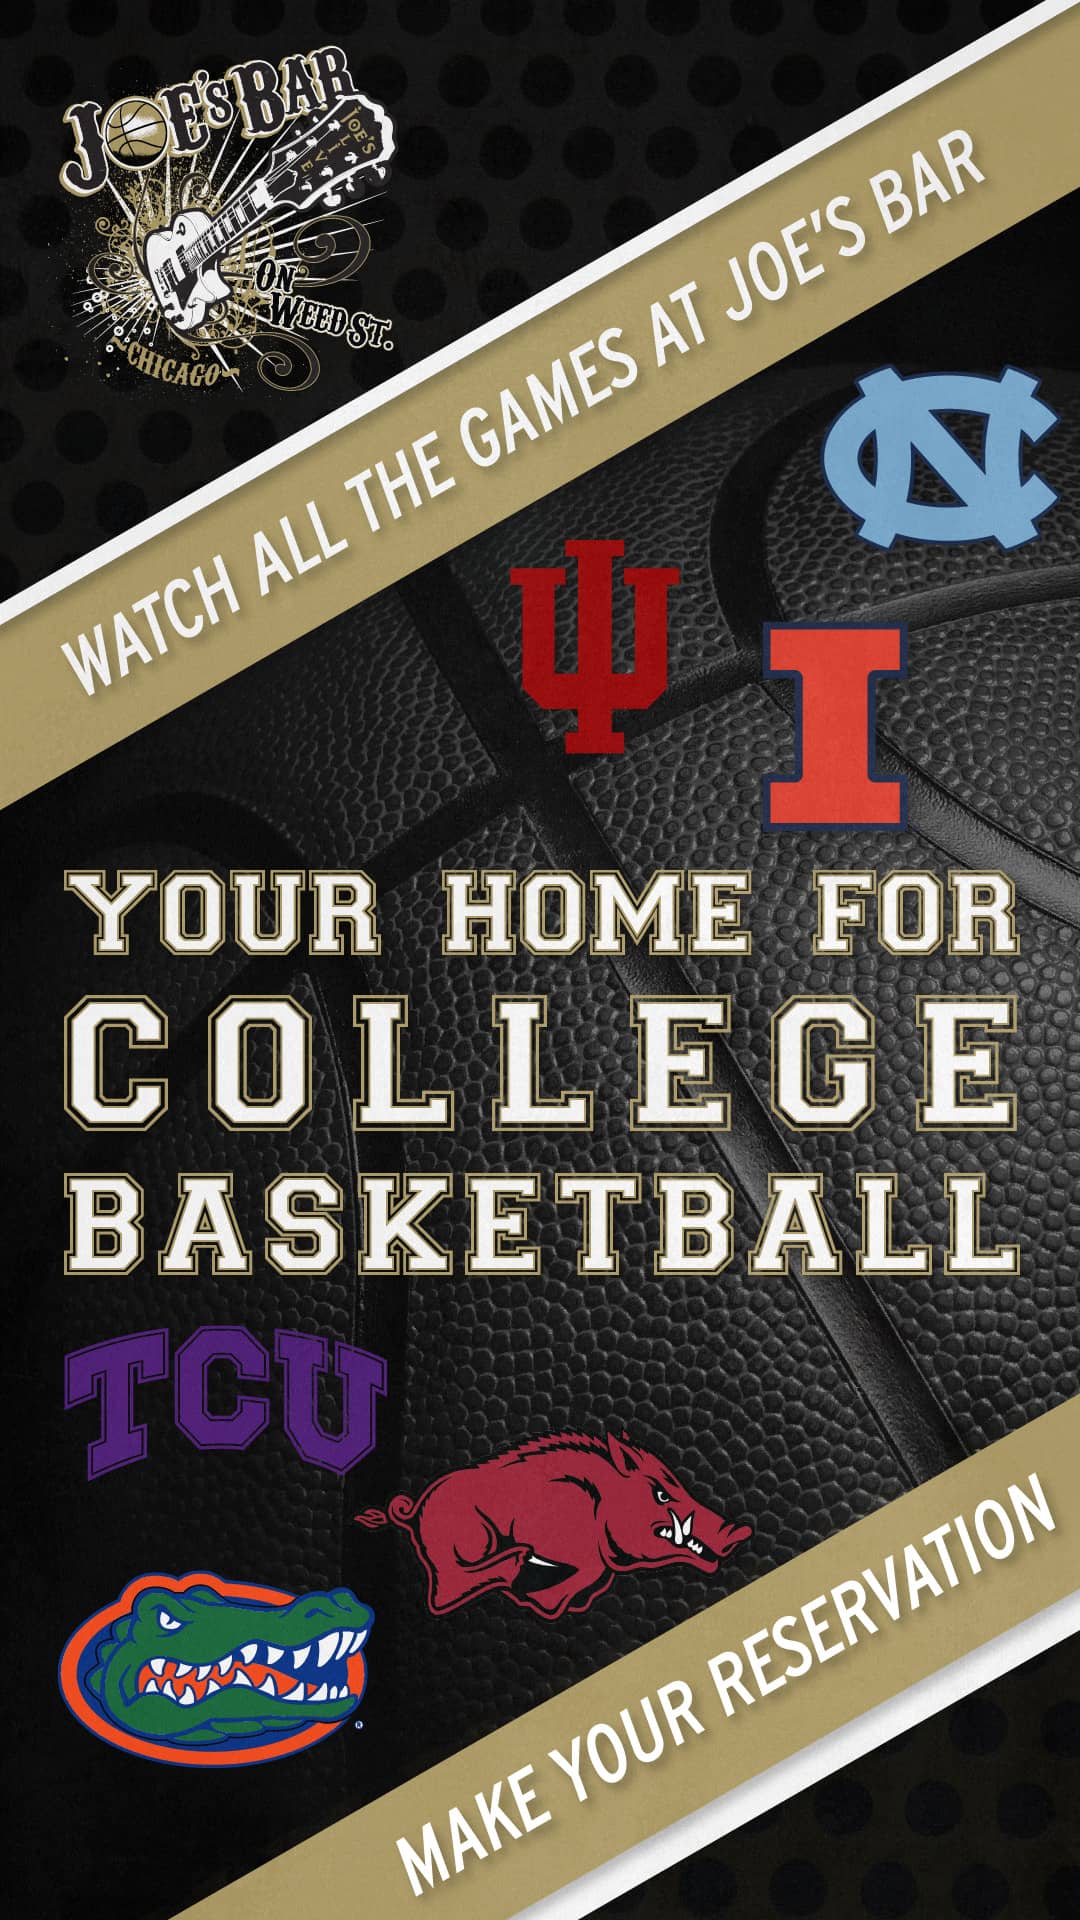 Poster To Reserve Your Table For College Basketball Games at Joe's on Weed St.